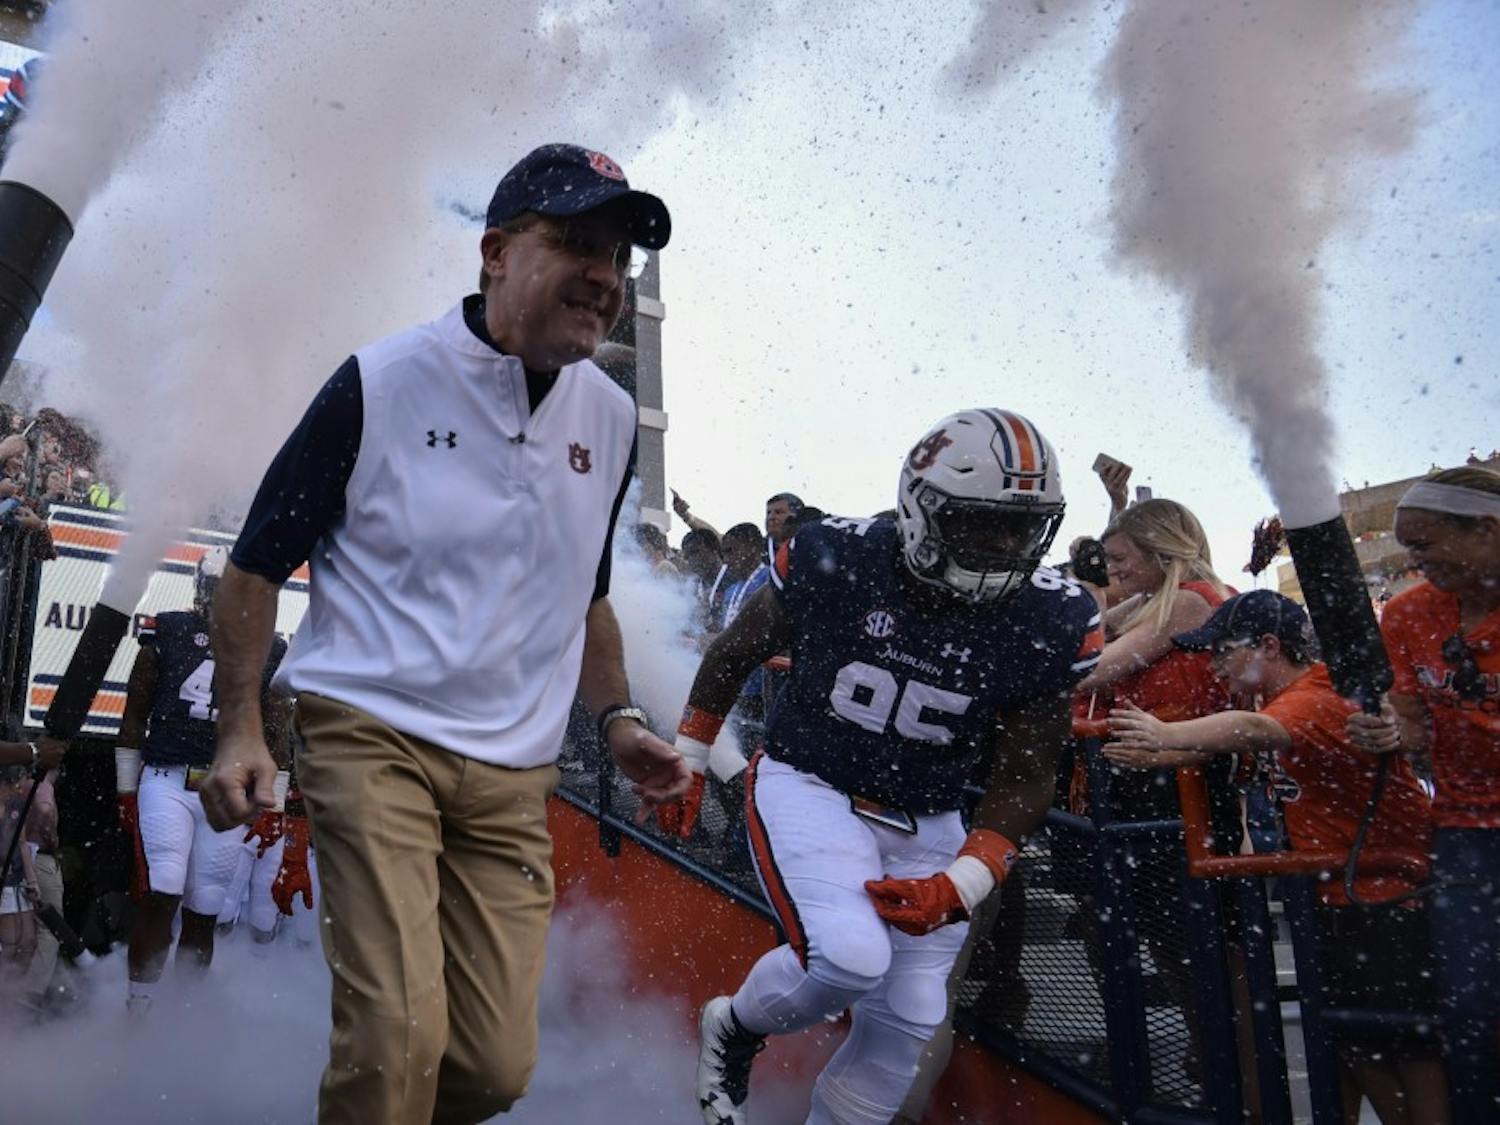 Gus Malzahn and Dontavius Russell (95) enter the field prior to a NCAA college football game, Saturday, Oct. 1, 2016, in Auburn, Ala.